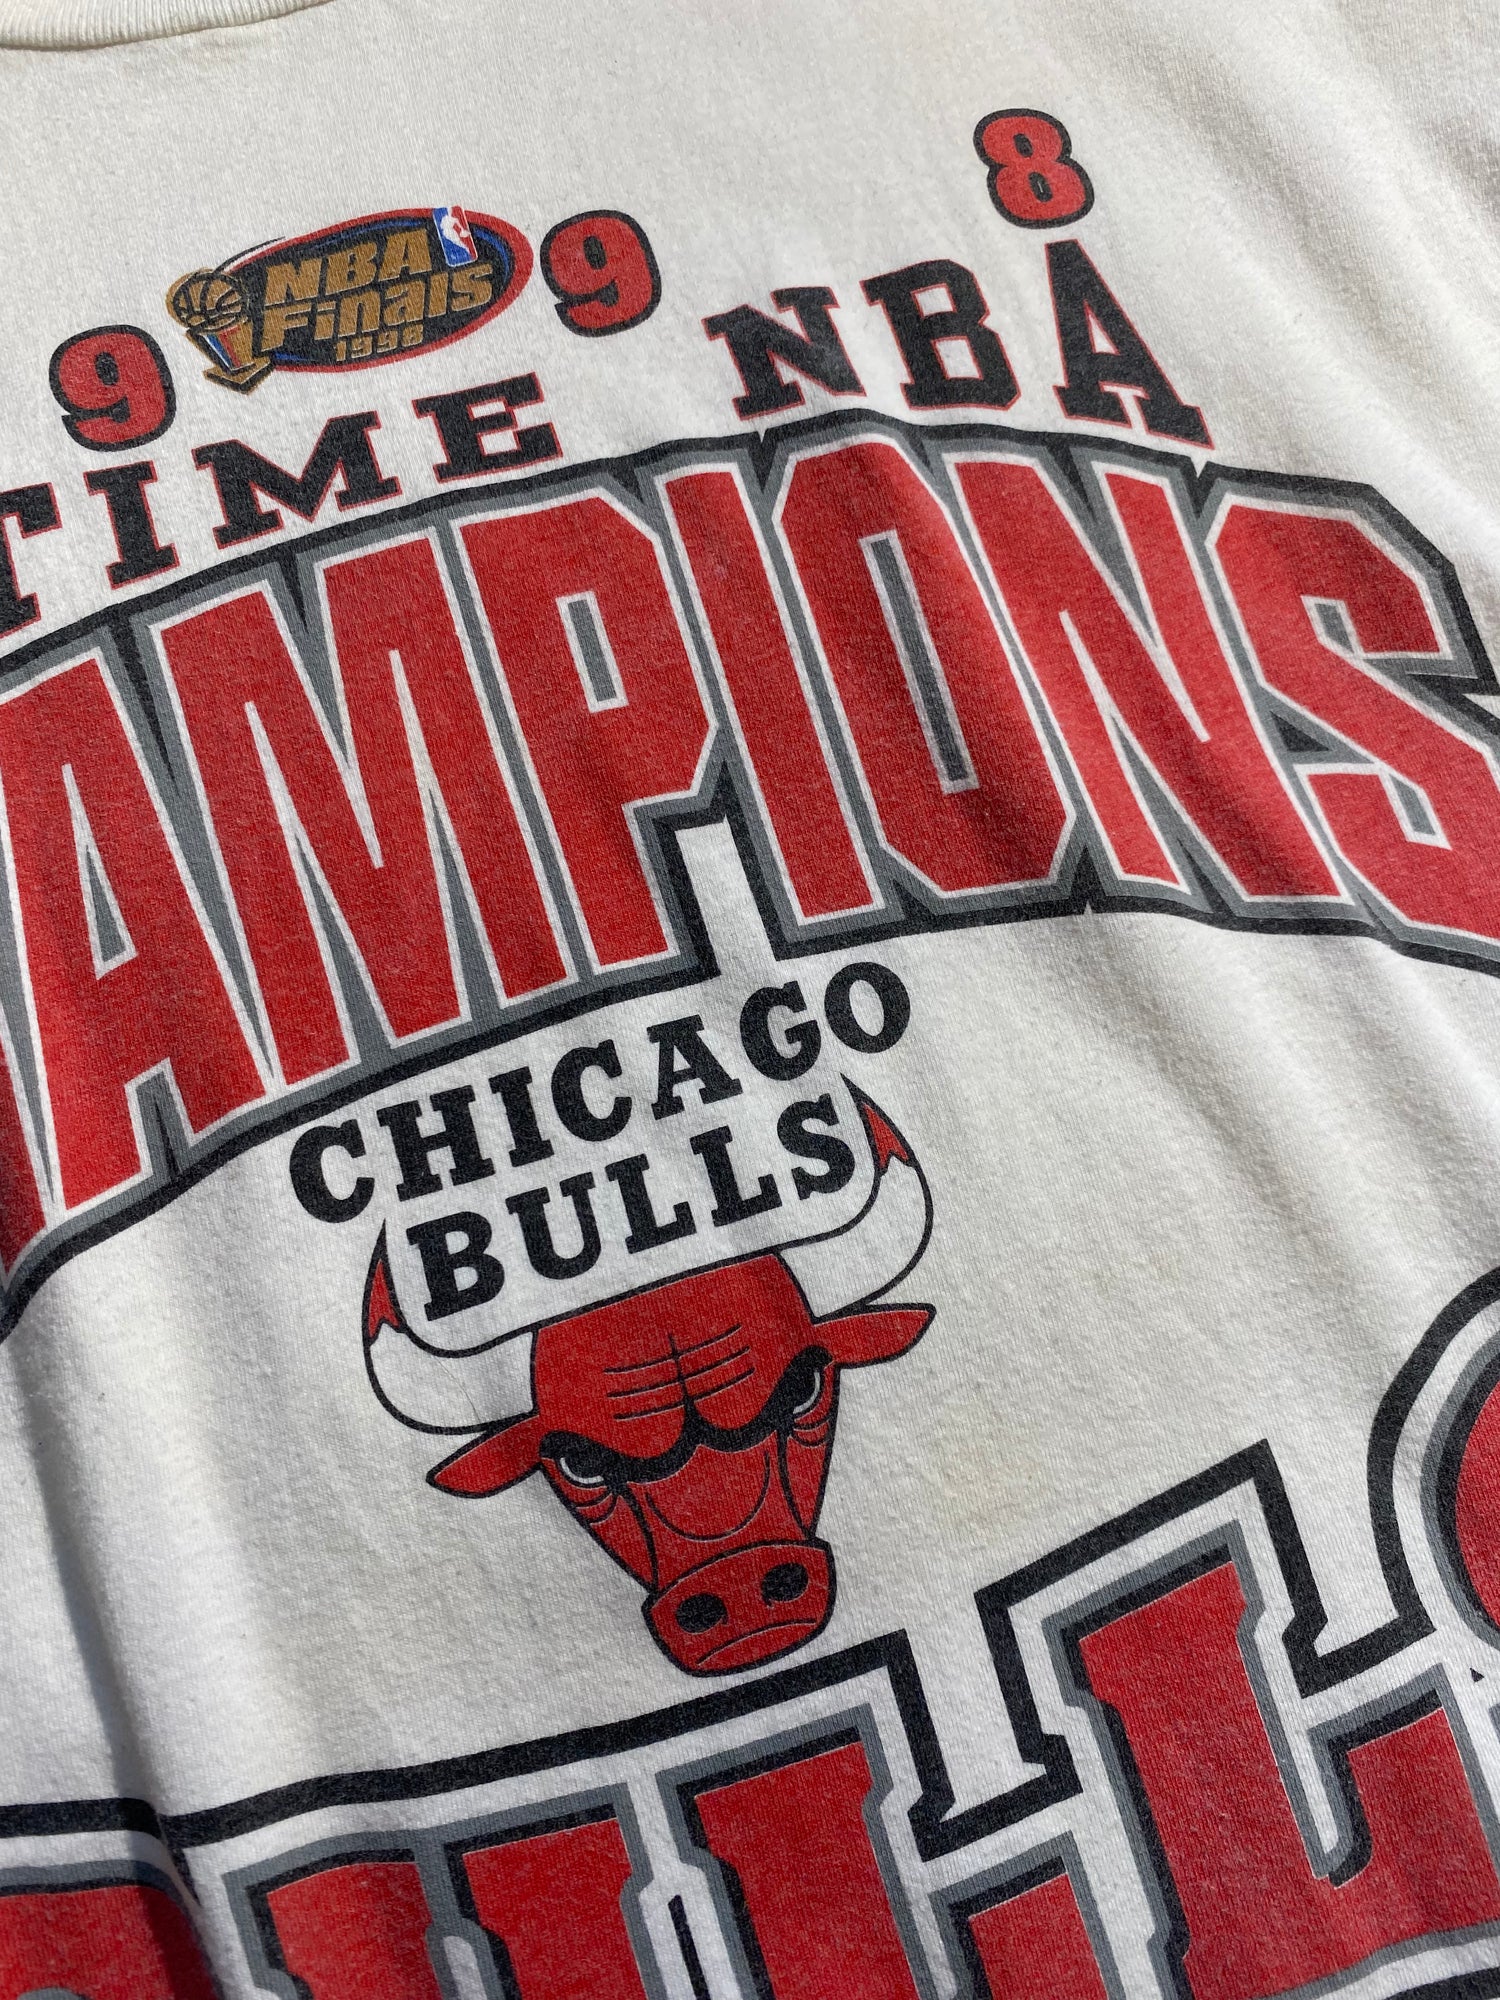 Sports / College Vintage NBA Chicago Bulls Champions 1993 Tee Shirt Size Large Made in USA